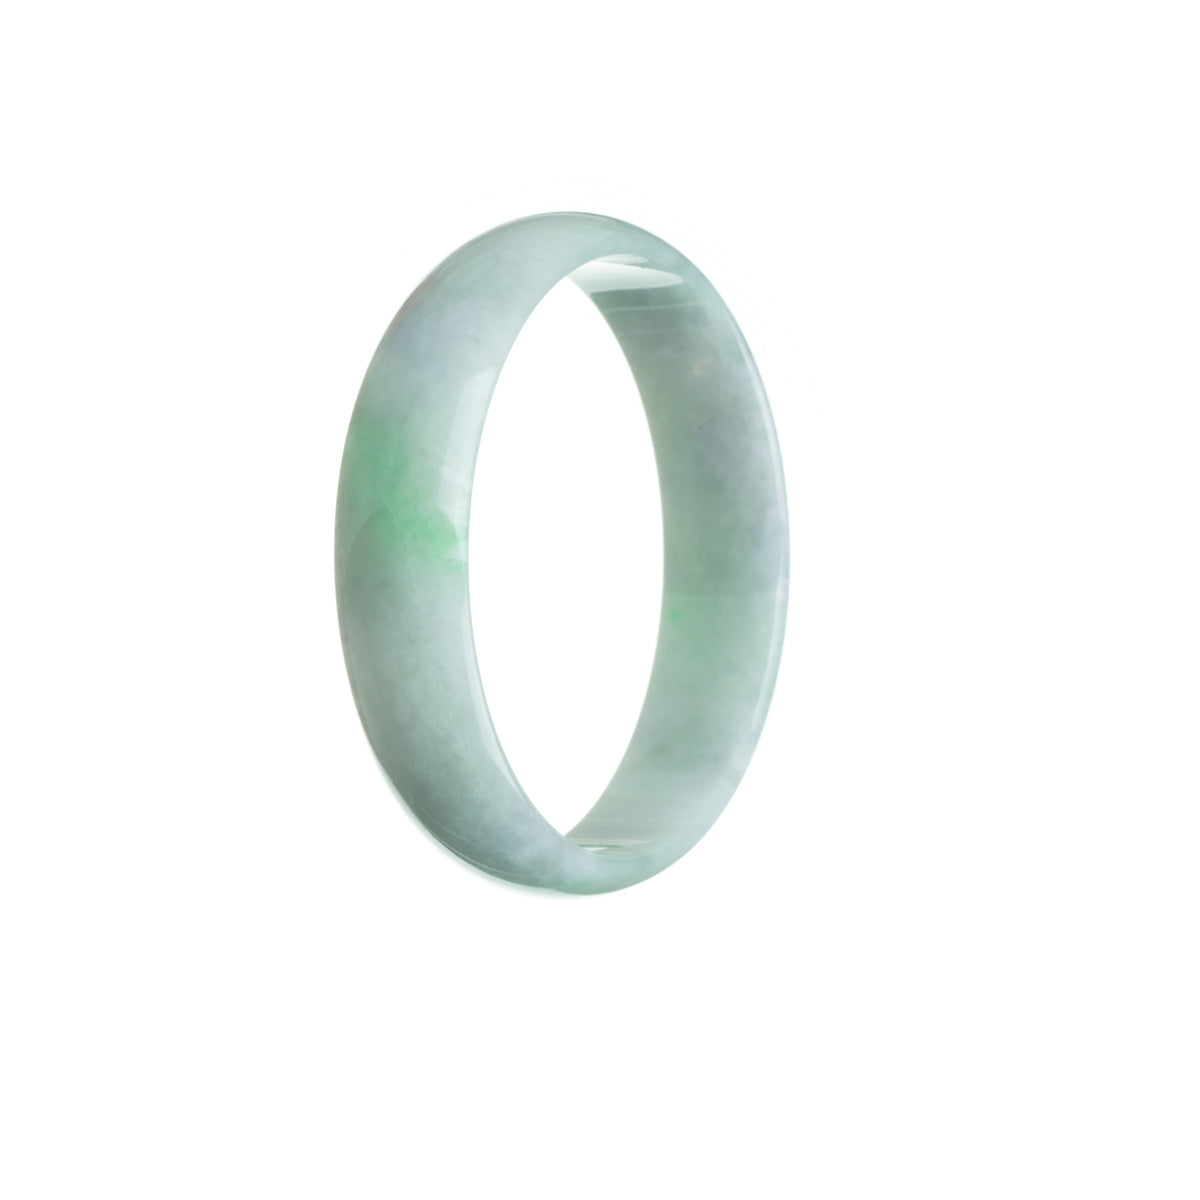 An elegant white and green jade bangle with a traditional design, made from high-quality Grade A jade. The bangle is 52mm in size and has a flat shape. Perfect for adding a touch of sophistication to any outfit.